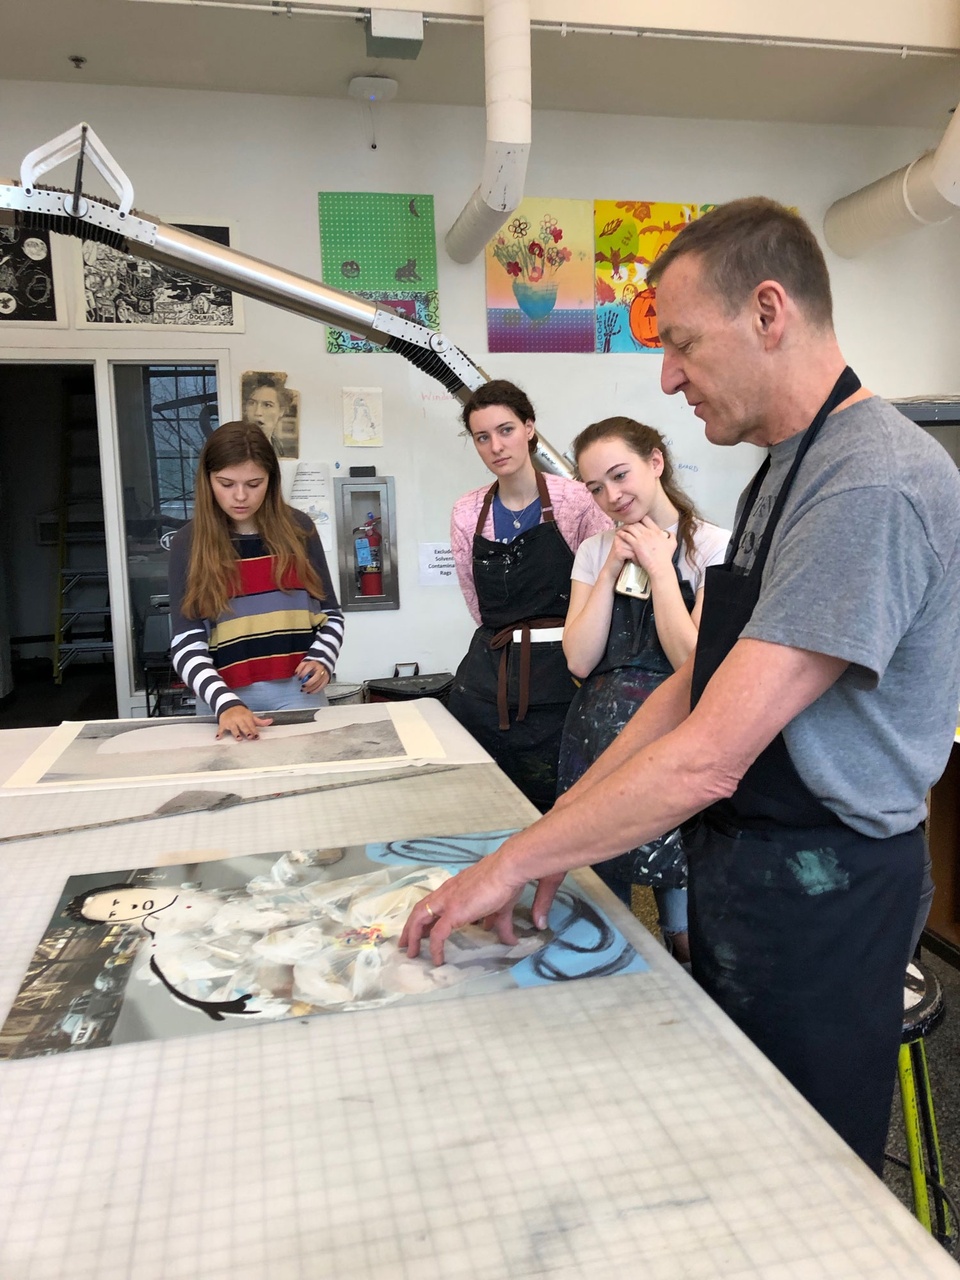 David gesturing to a print in front of him on the table while 3 students look on.